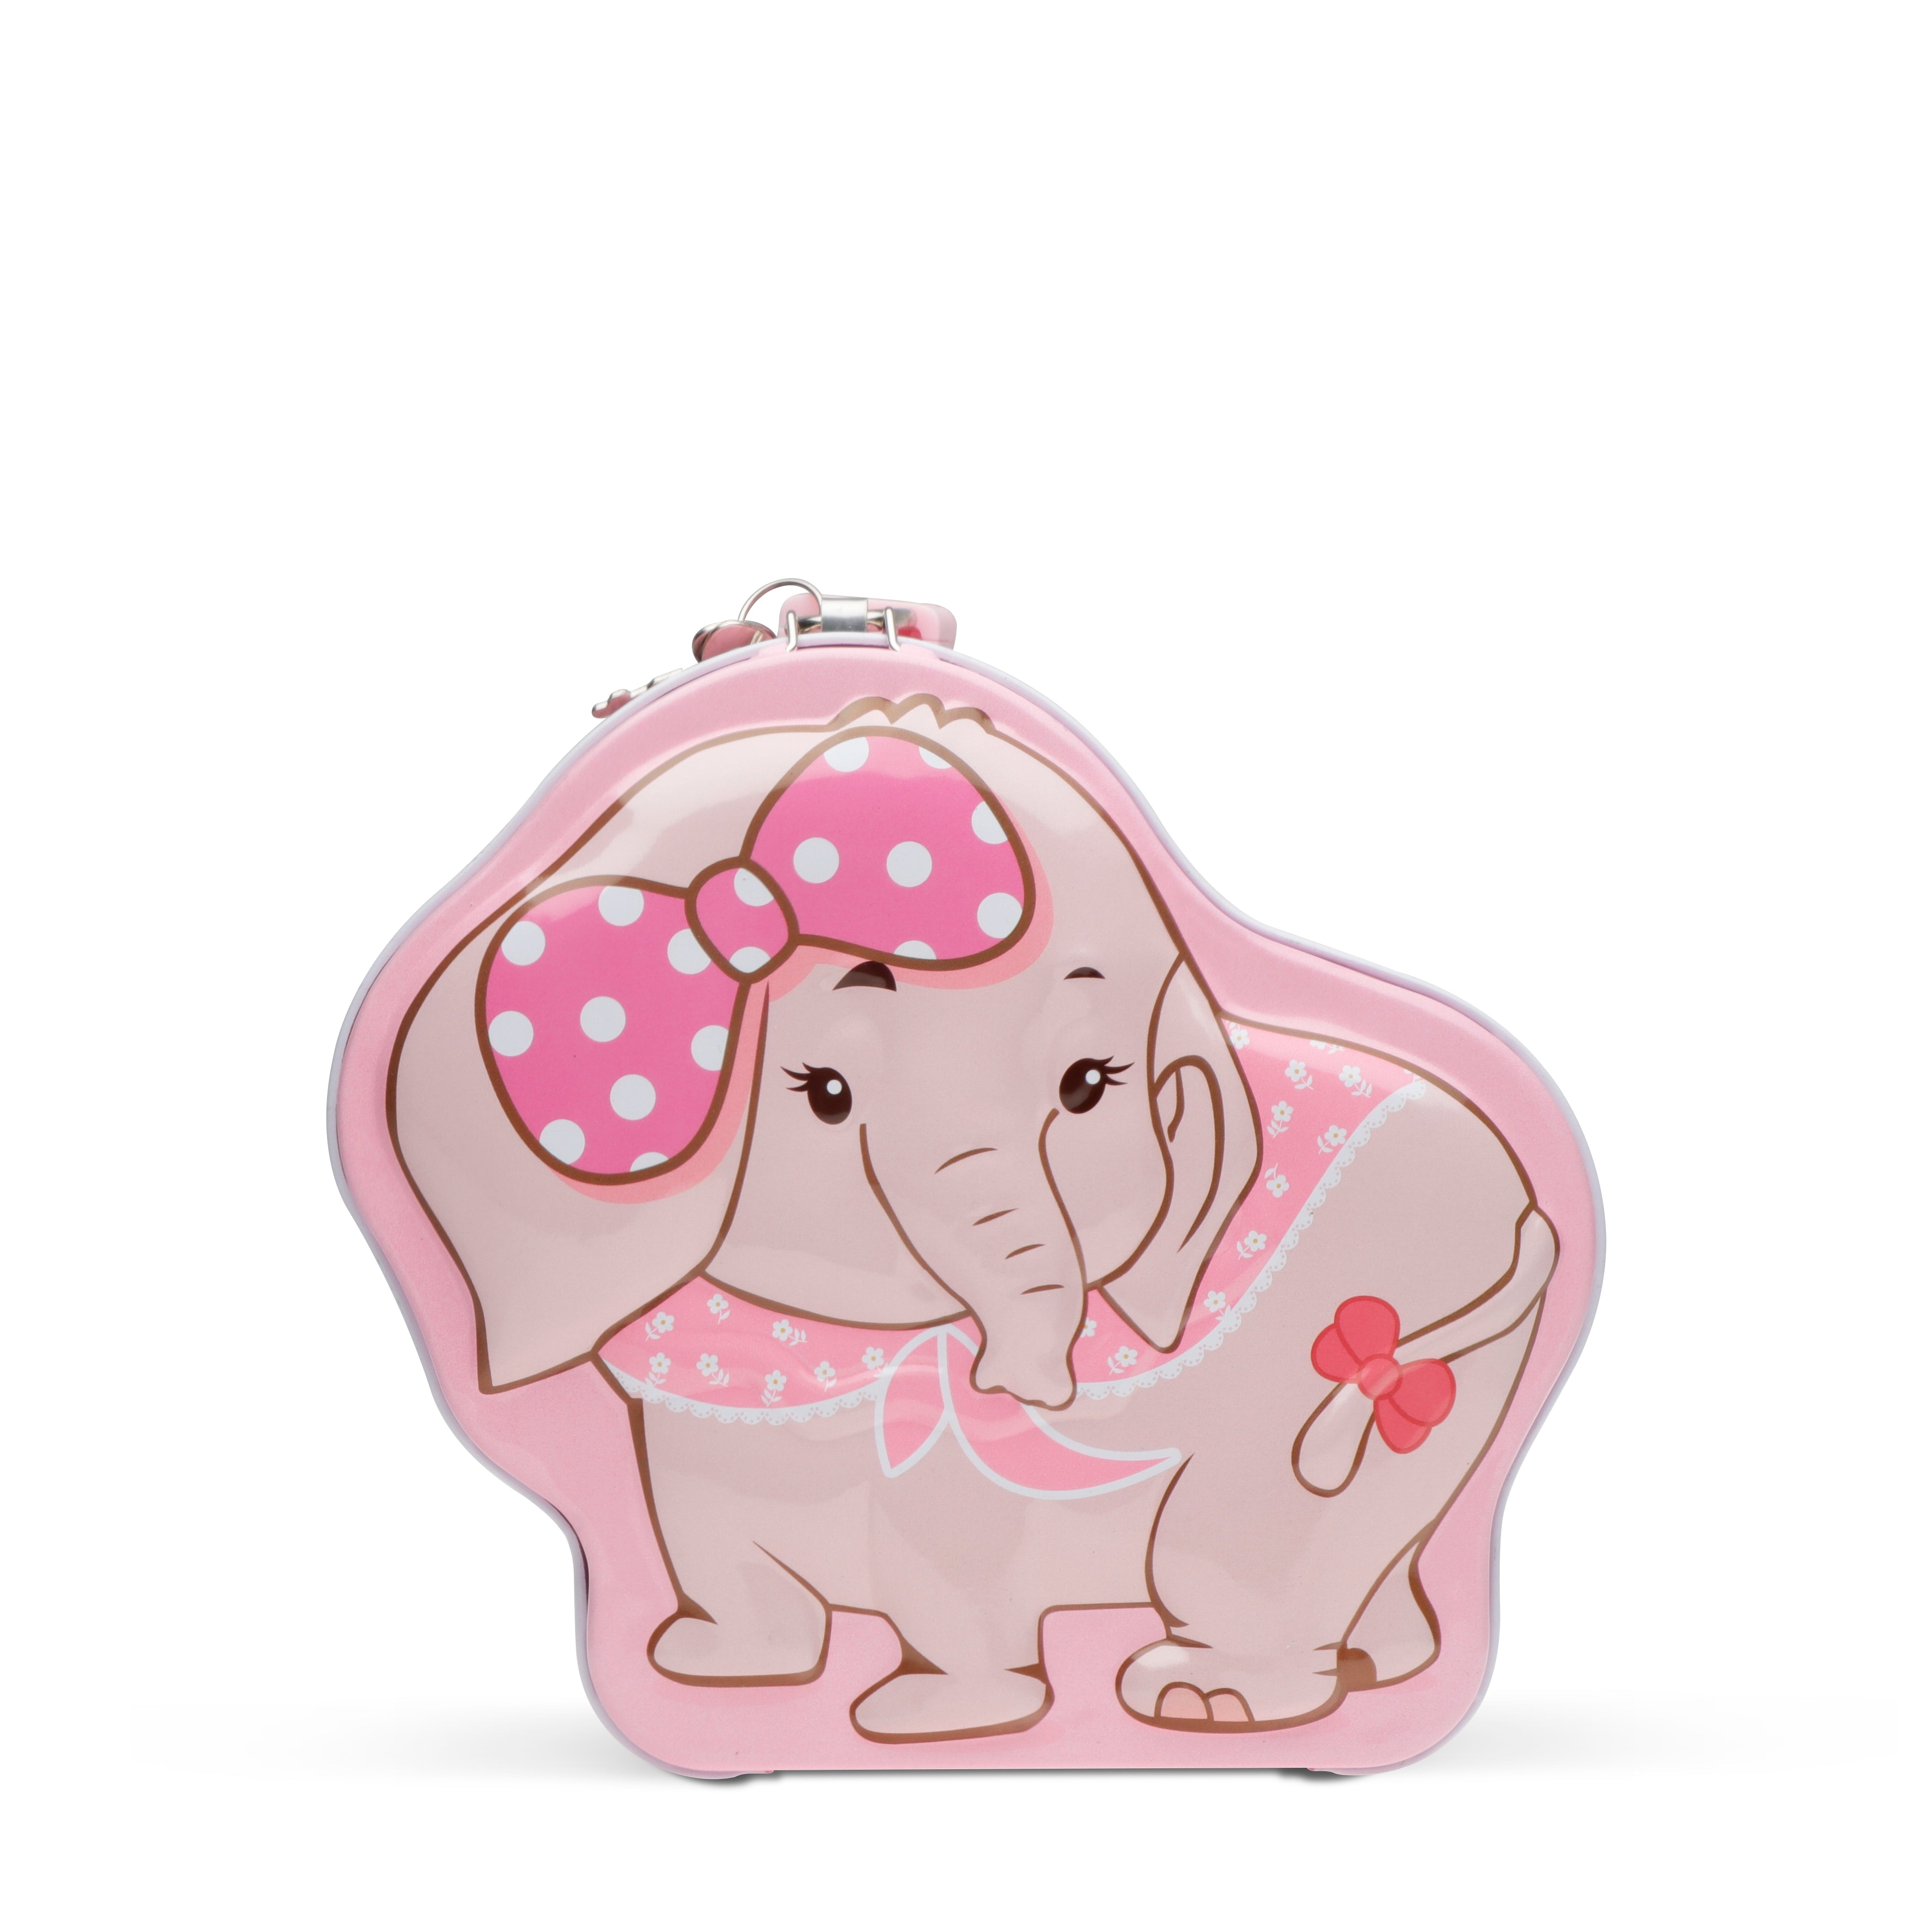 Archies | Archies Piggy Bank Piggy Bank for Kids, Elephant Shaped Coin Box, Piggybank, Coin Bank, Money Bank, Piggy Bank for Kids Boys and Girls, Money Bank for Kids with Lock-Pink